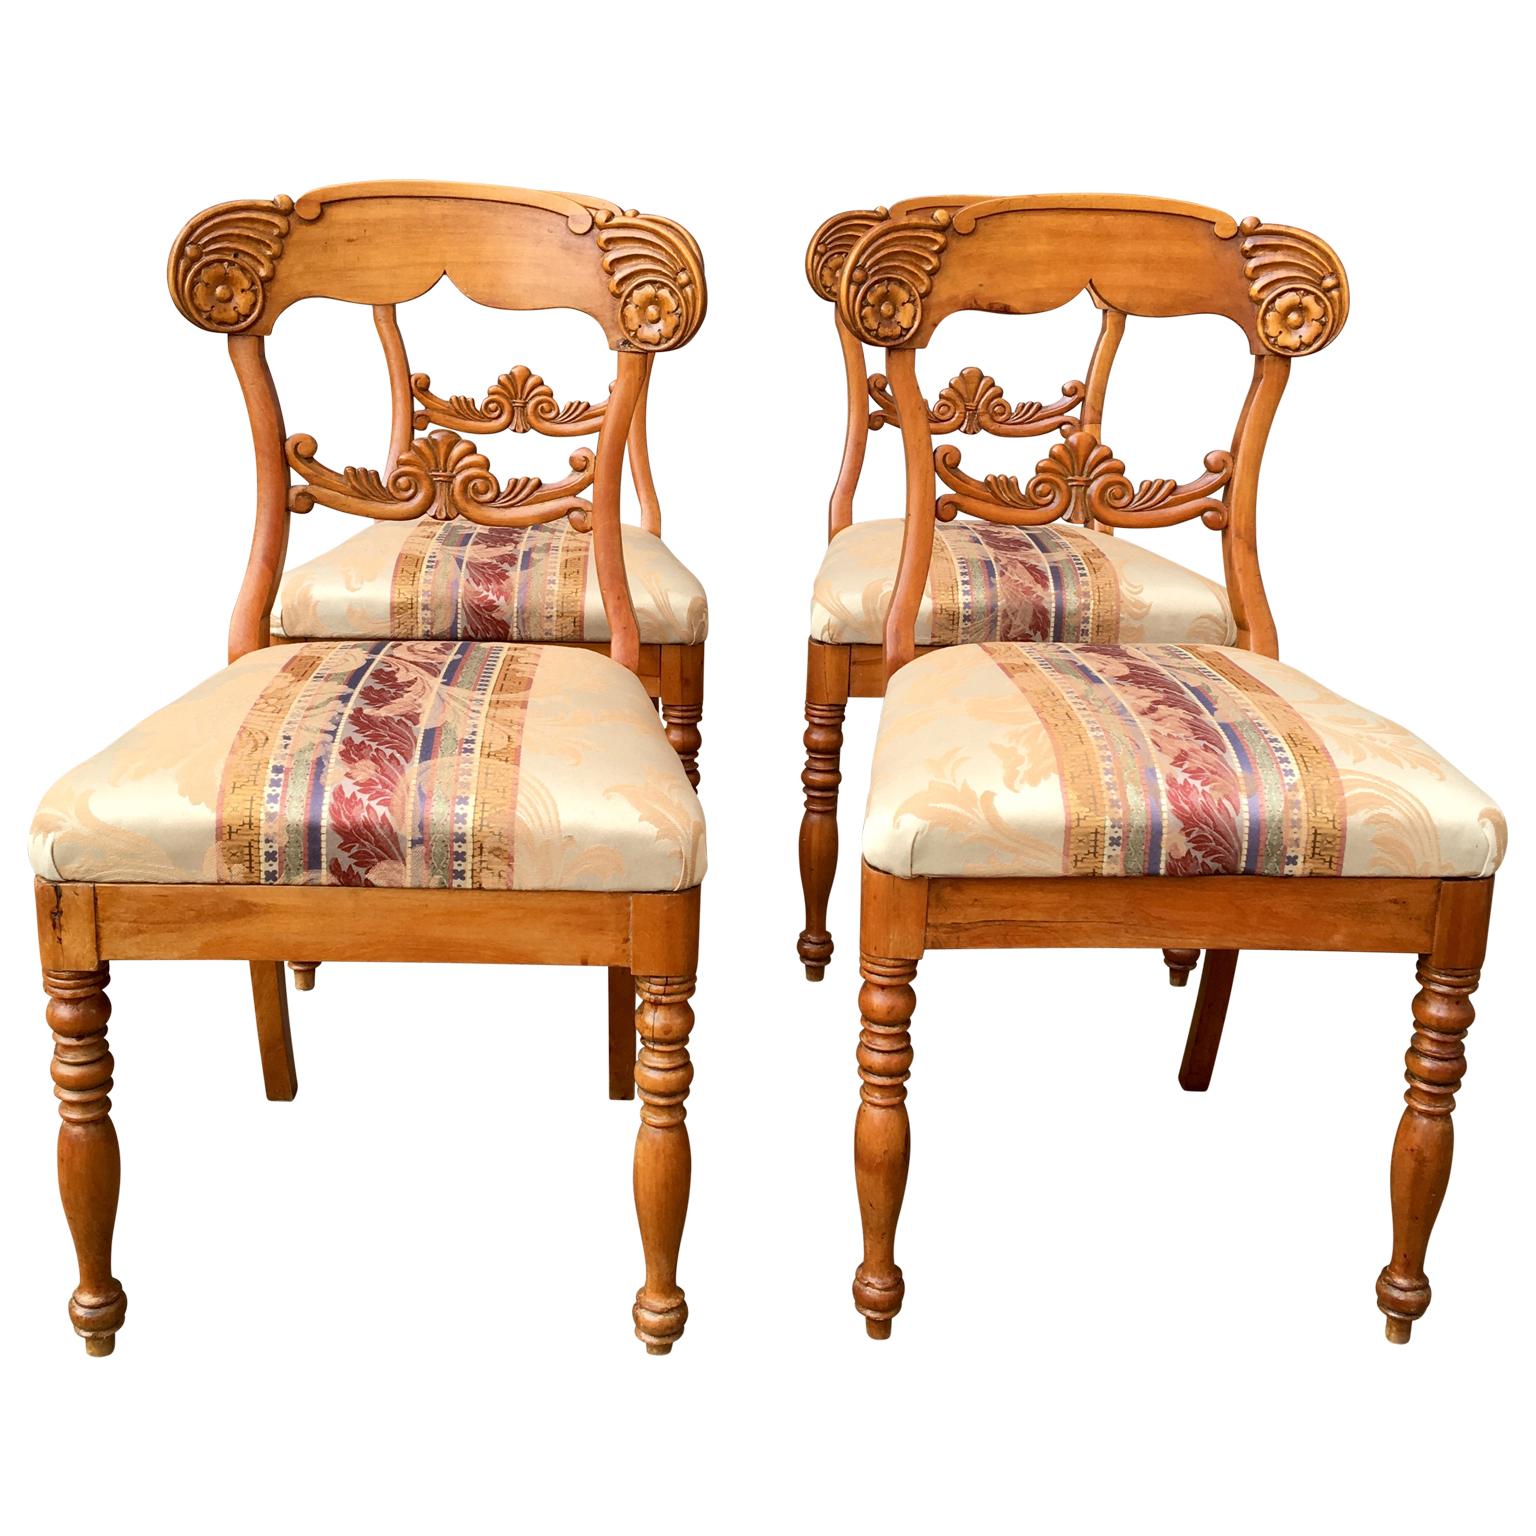 Hand-Crafted Set Of Four 19th Century Biedermeier Dining Room Chairs, Sweden For Sale